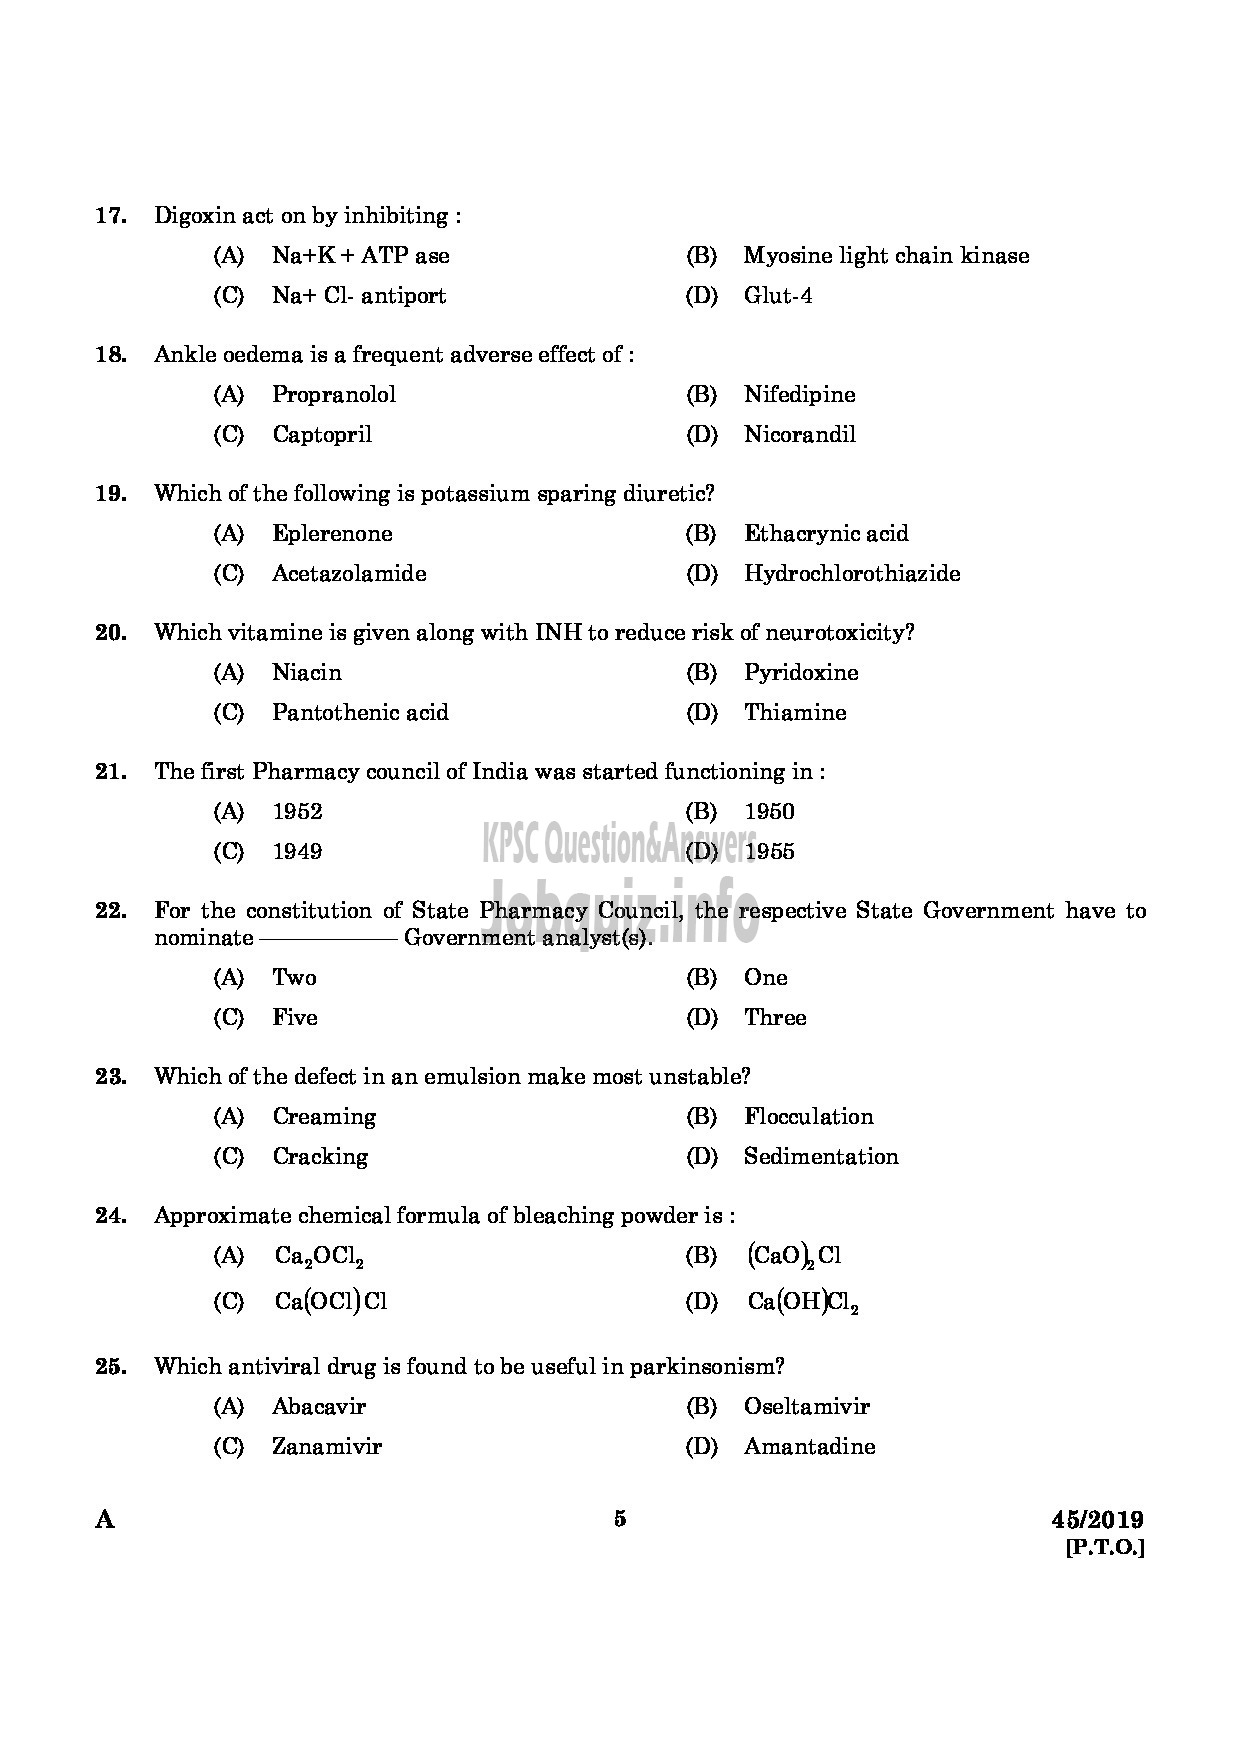 Kerala PSC Question Paper - Pharmacist Gr II Health Services/IMS English -3